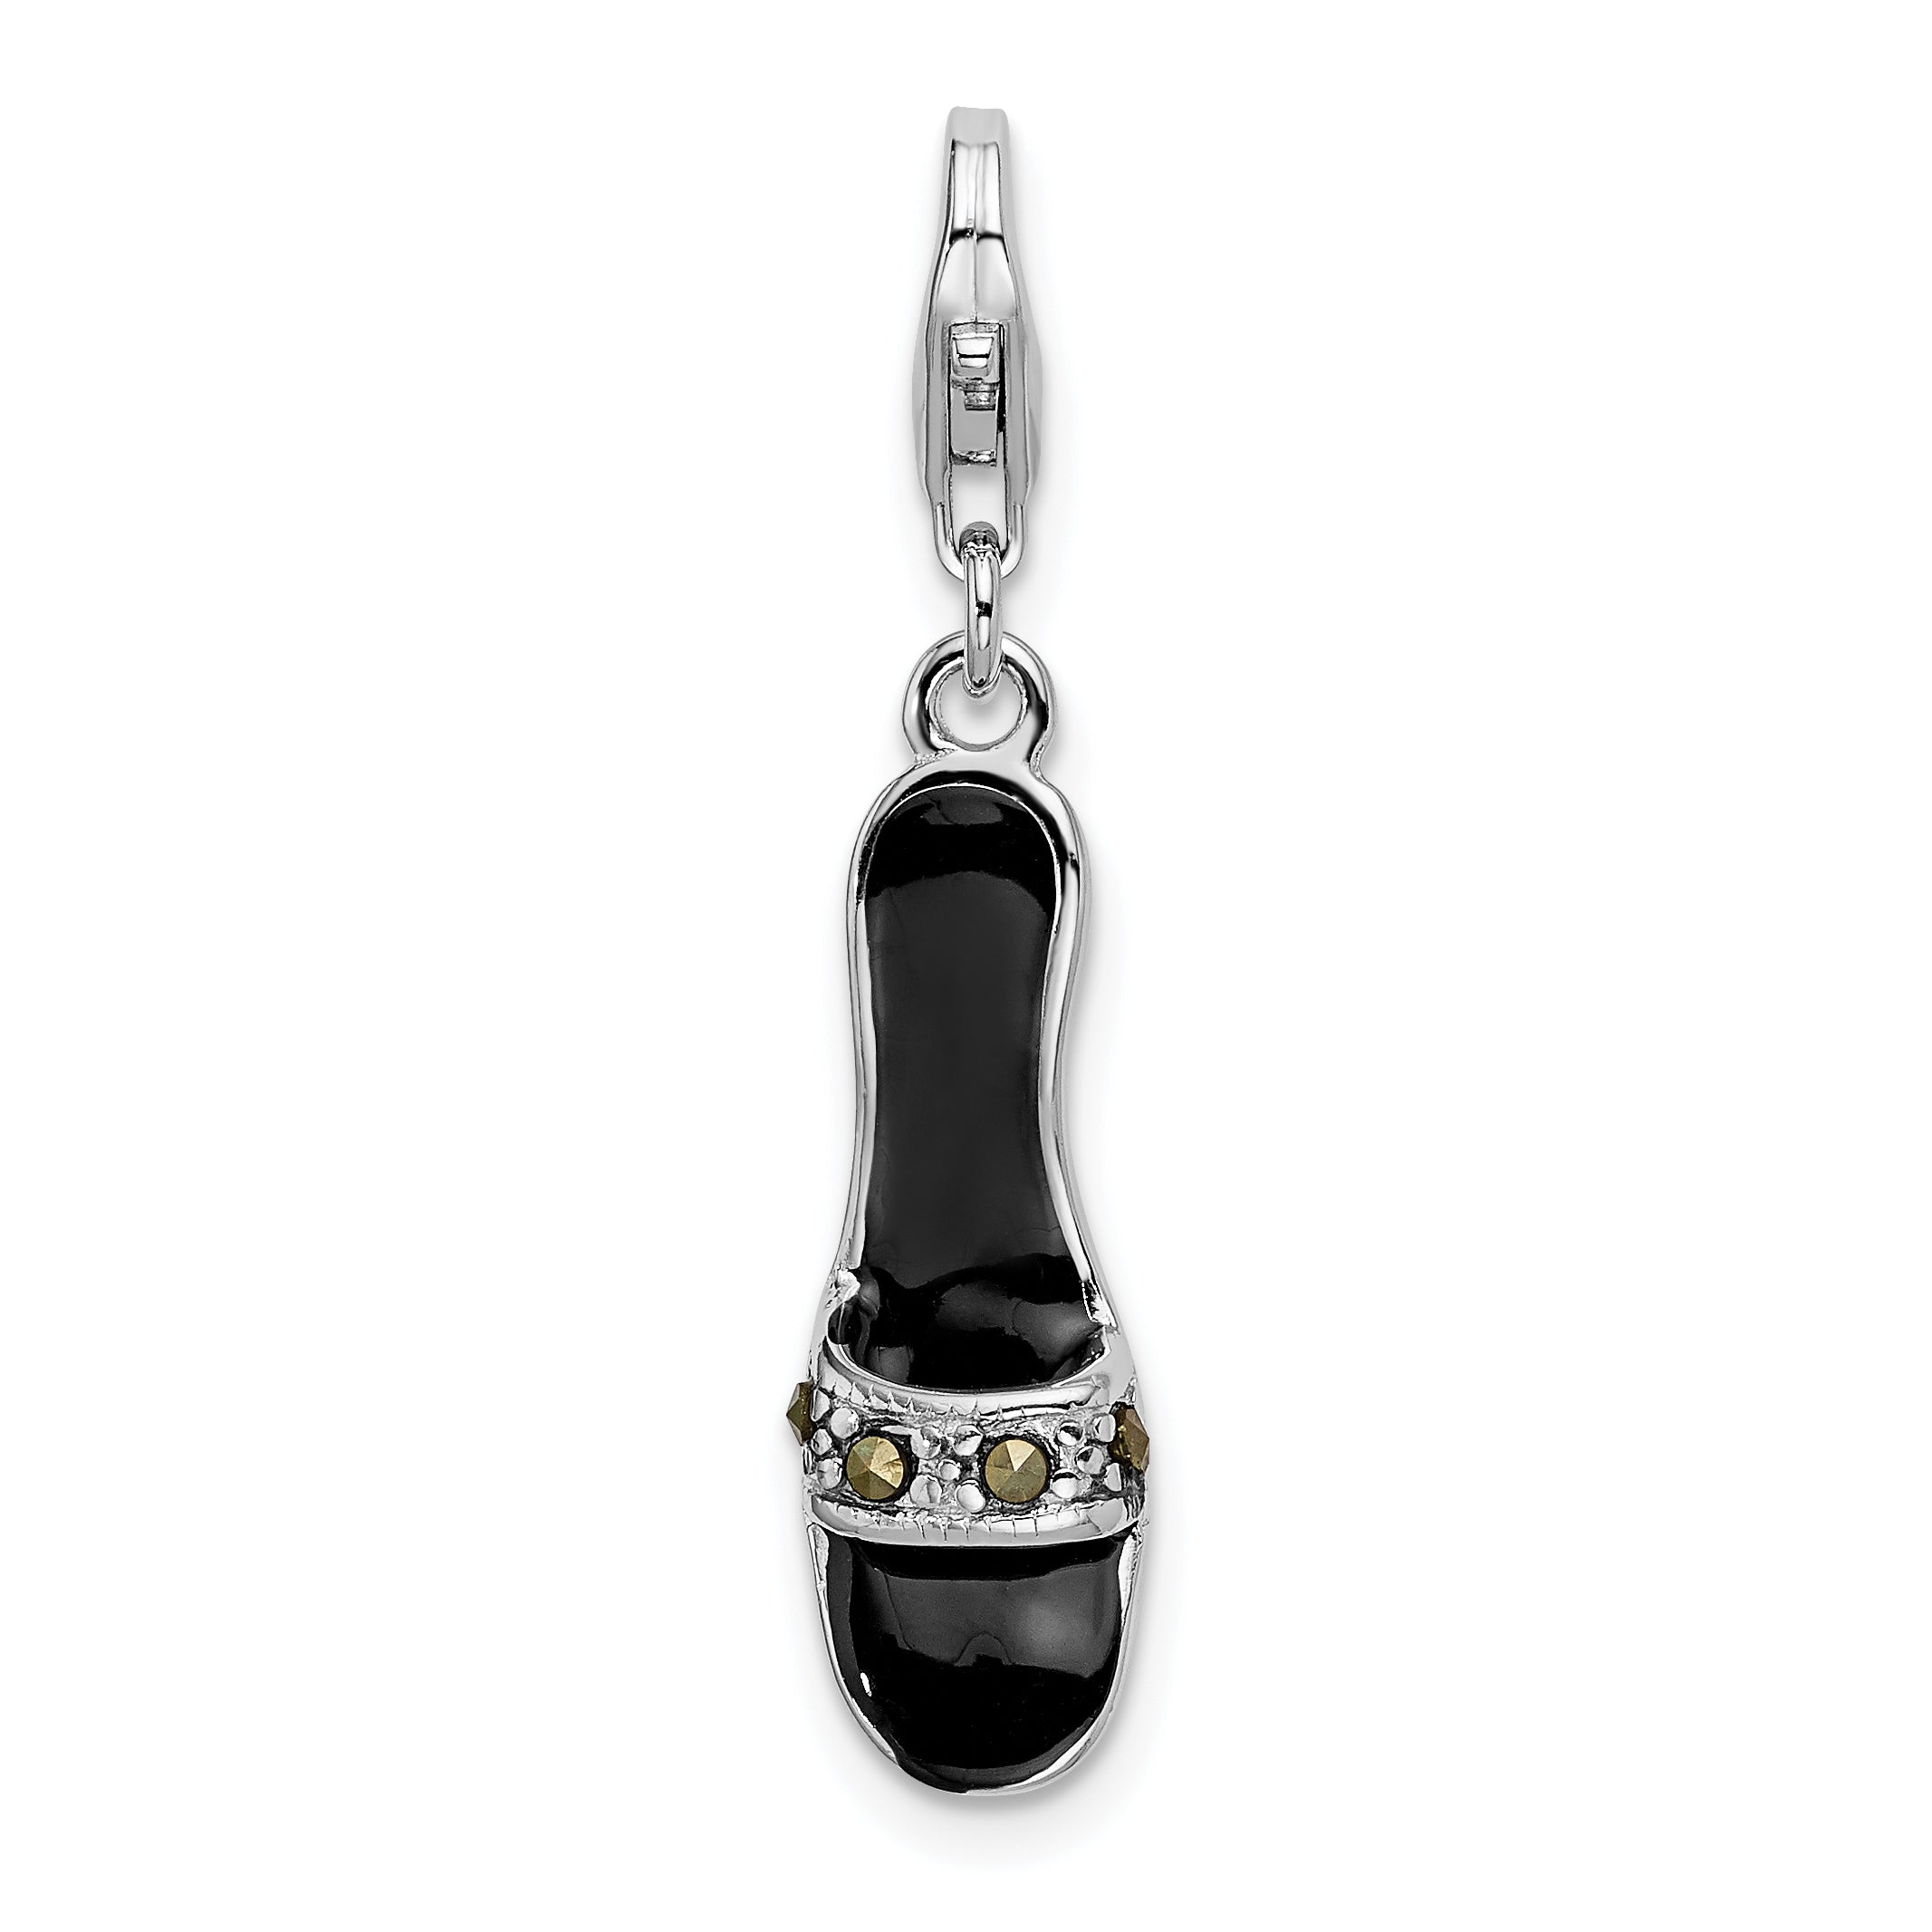 Amore La Vita Sterling Silver Rhodium-plated Polished 3-D Black Enameled and Marcasite Shoe Charm with Fancy Lobster Clasp